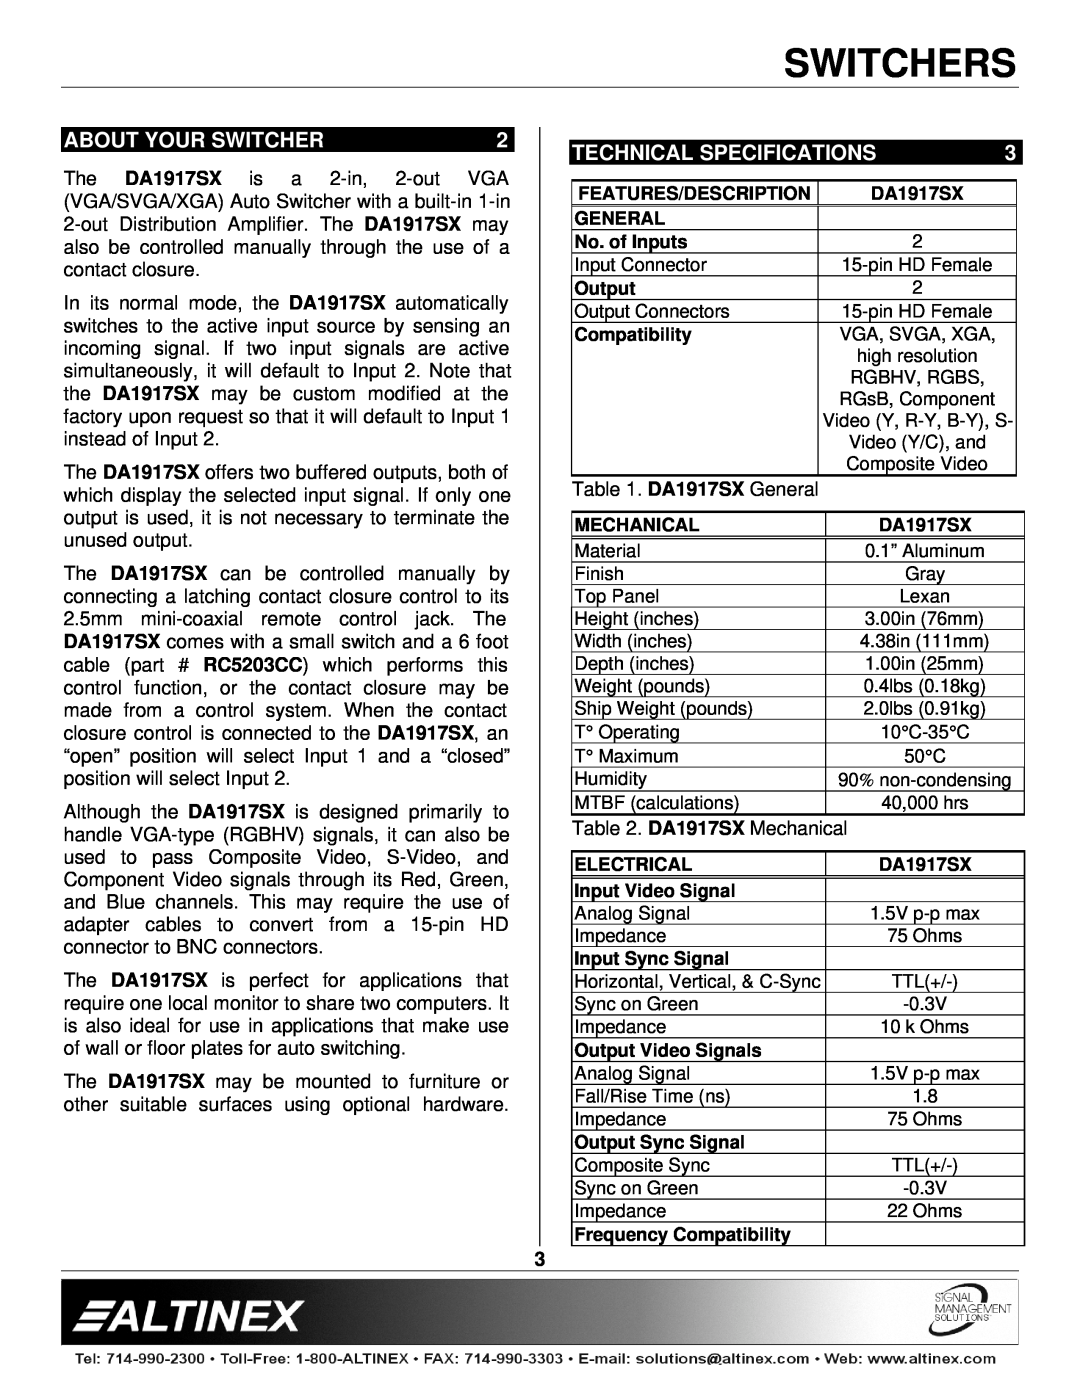 Altinex DA1917SX manual About Your Switcher, Technical Specifications, Switchers 